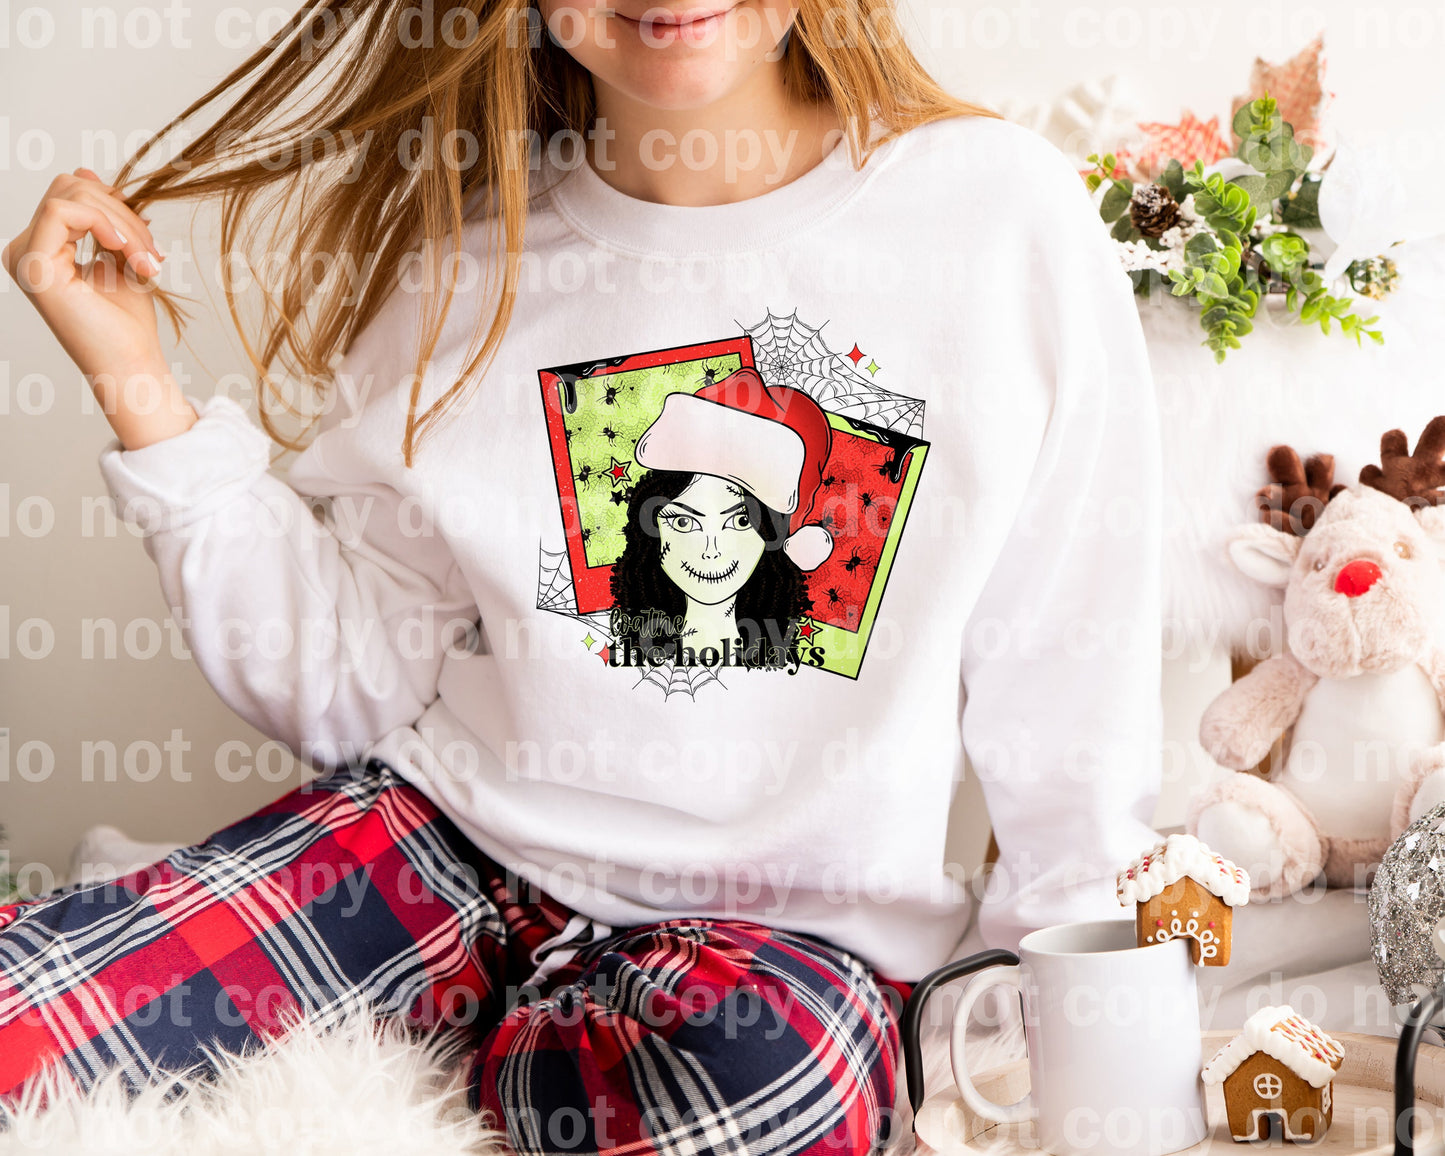 Loathe The Holidays Polaroid Curly Hair with Optional Two Rows Sleeve Designs Dream Print or Sublimation Print